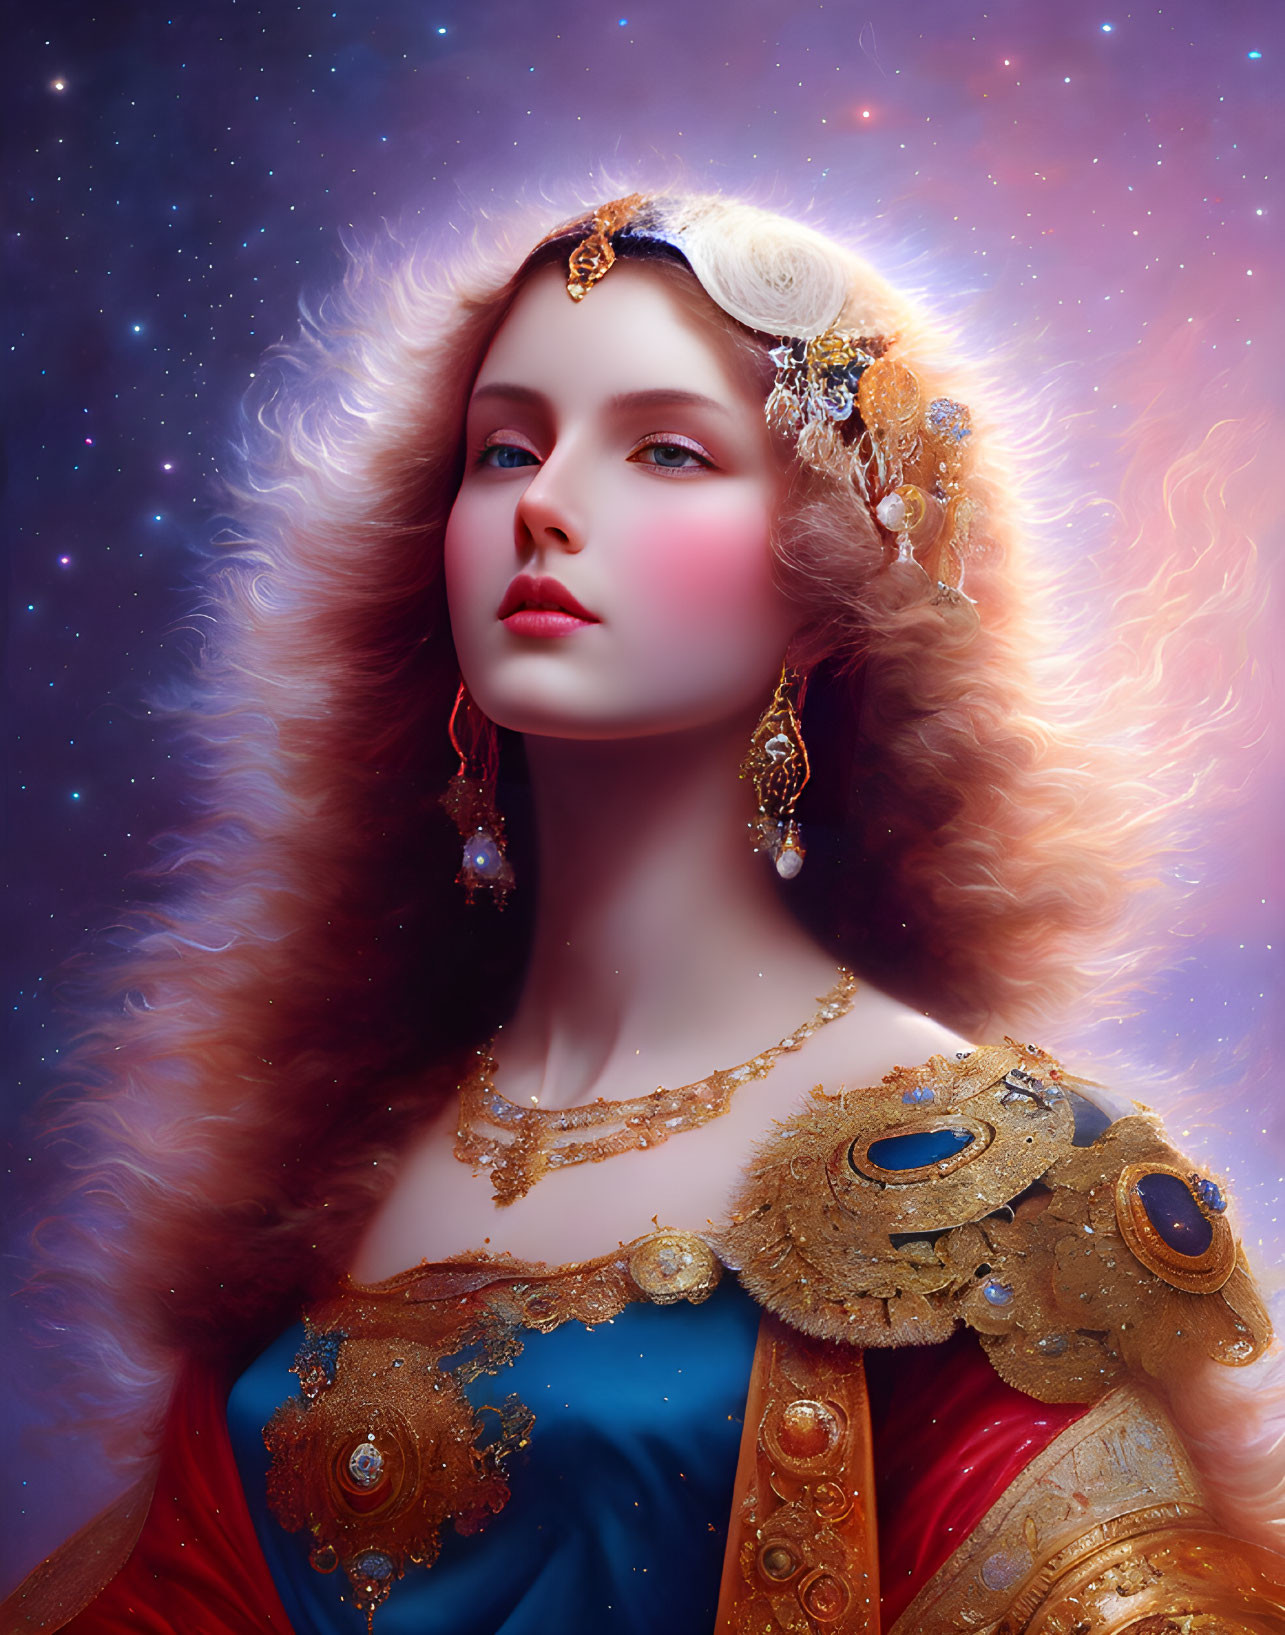 Regal woman with porcelain skin in gold jewelry and blue/red gown against starry backdrop